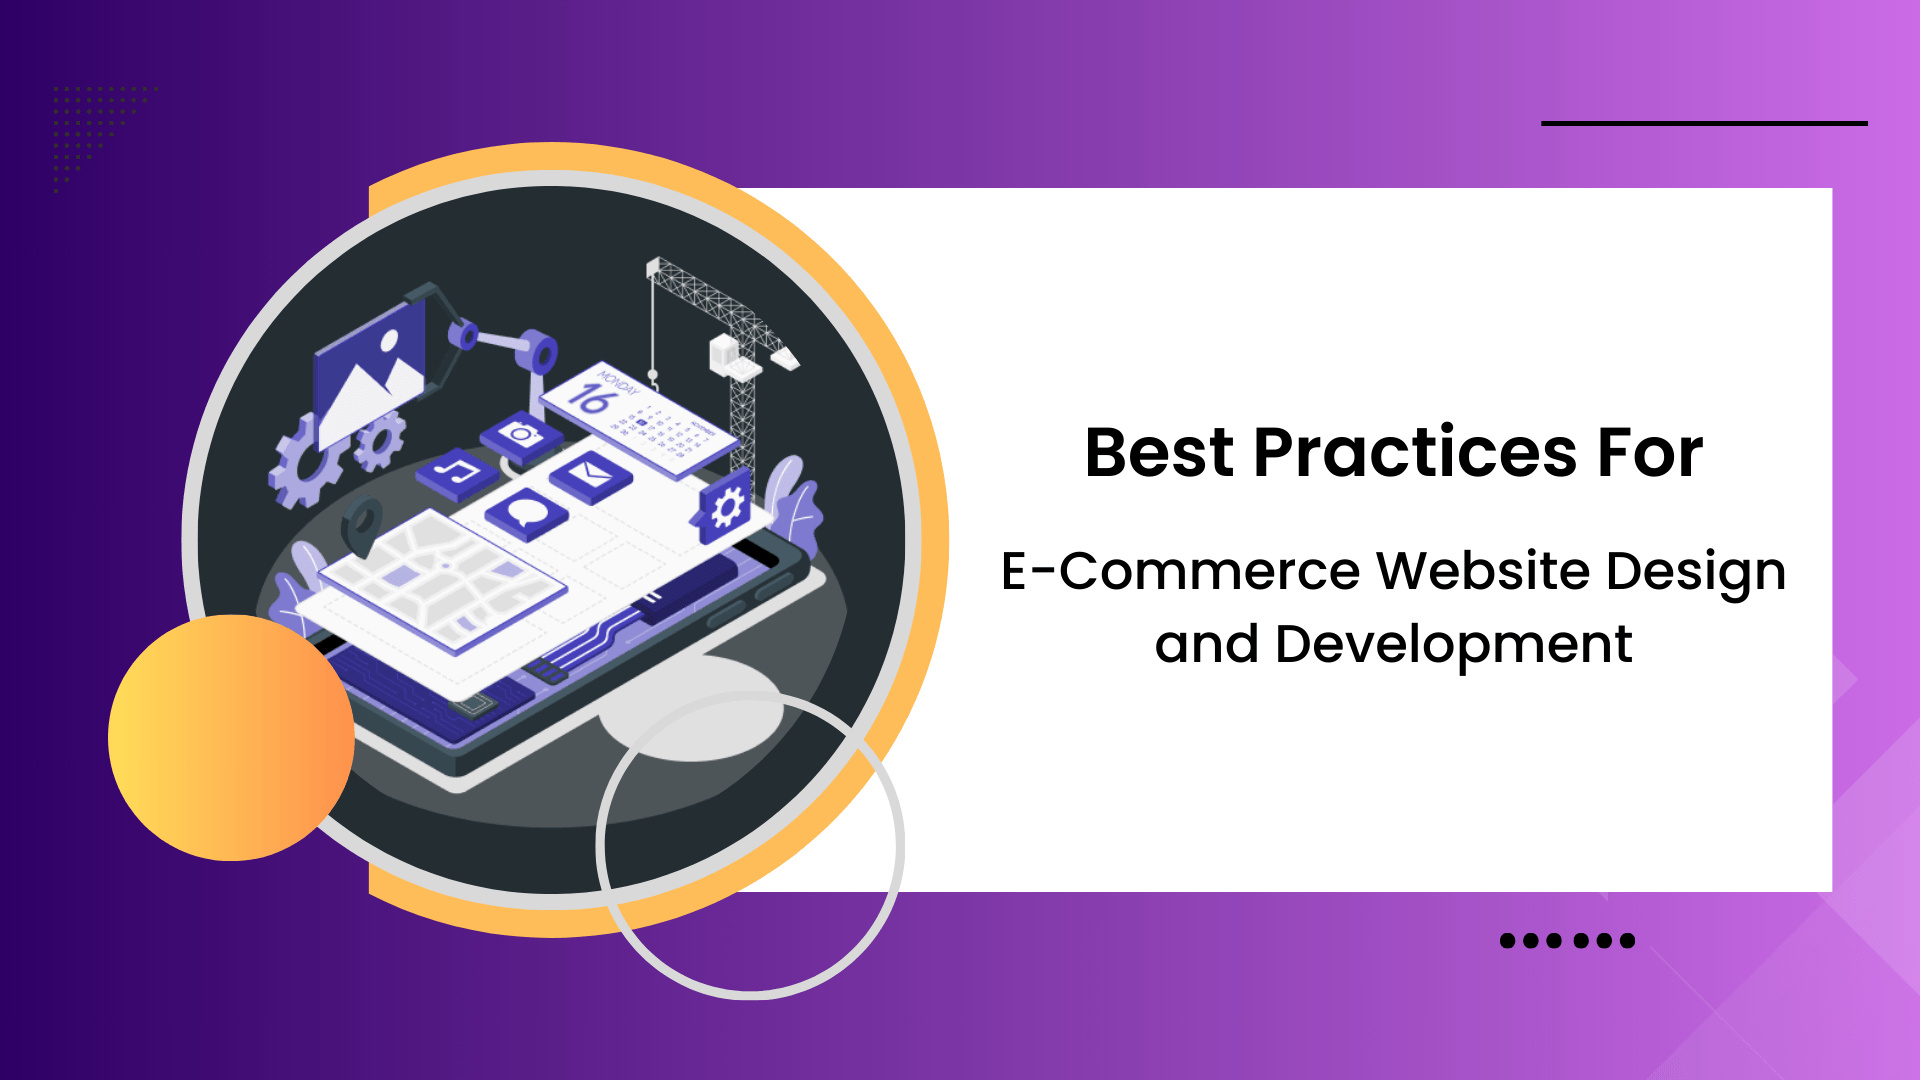 Best Practices for E-Commerce Website Design and Development